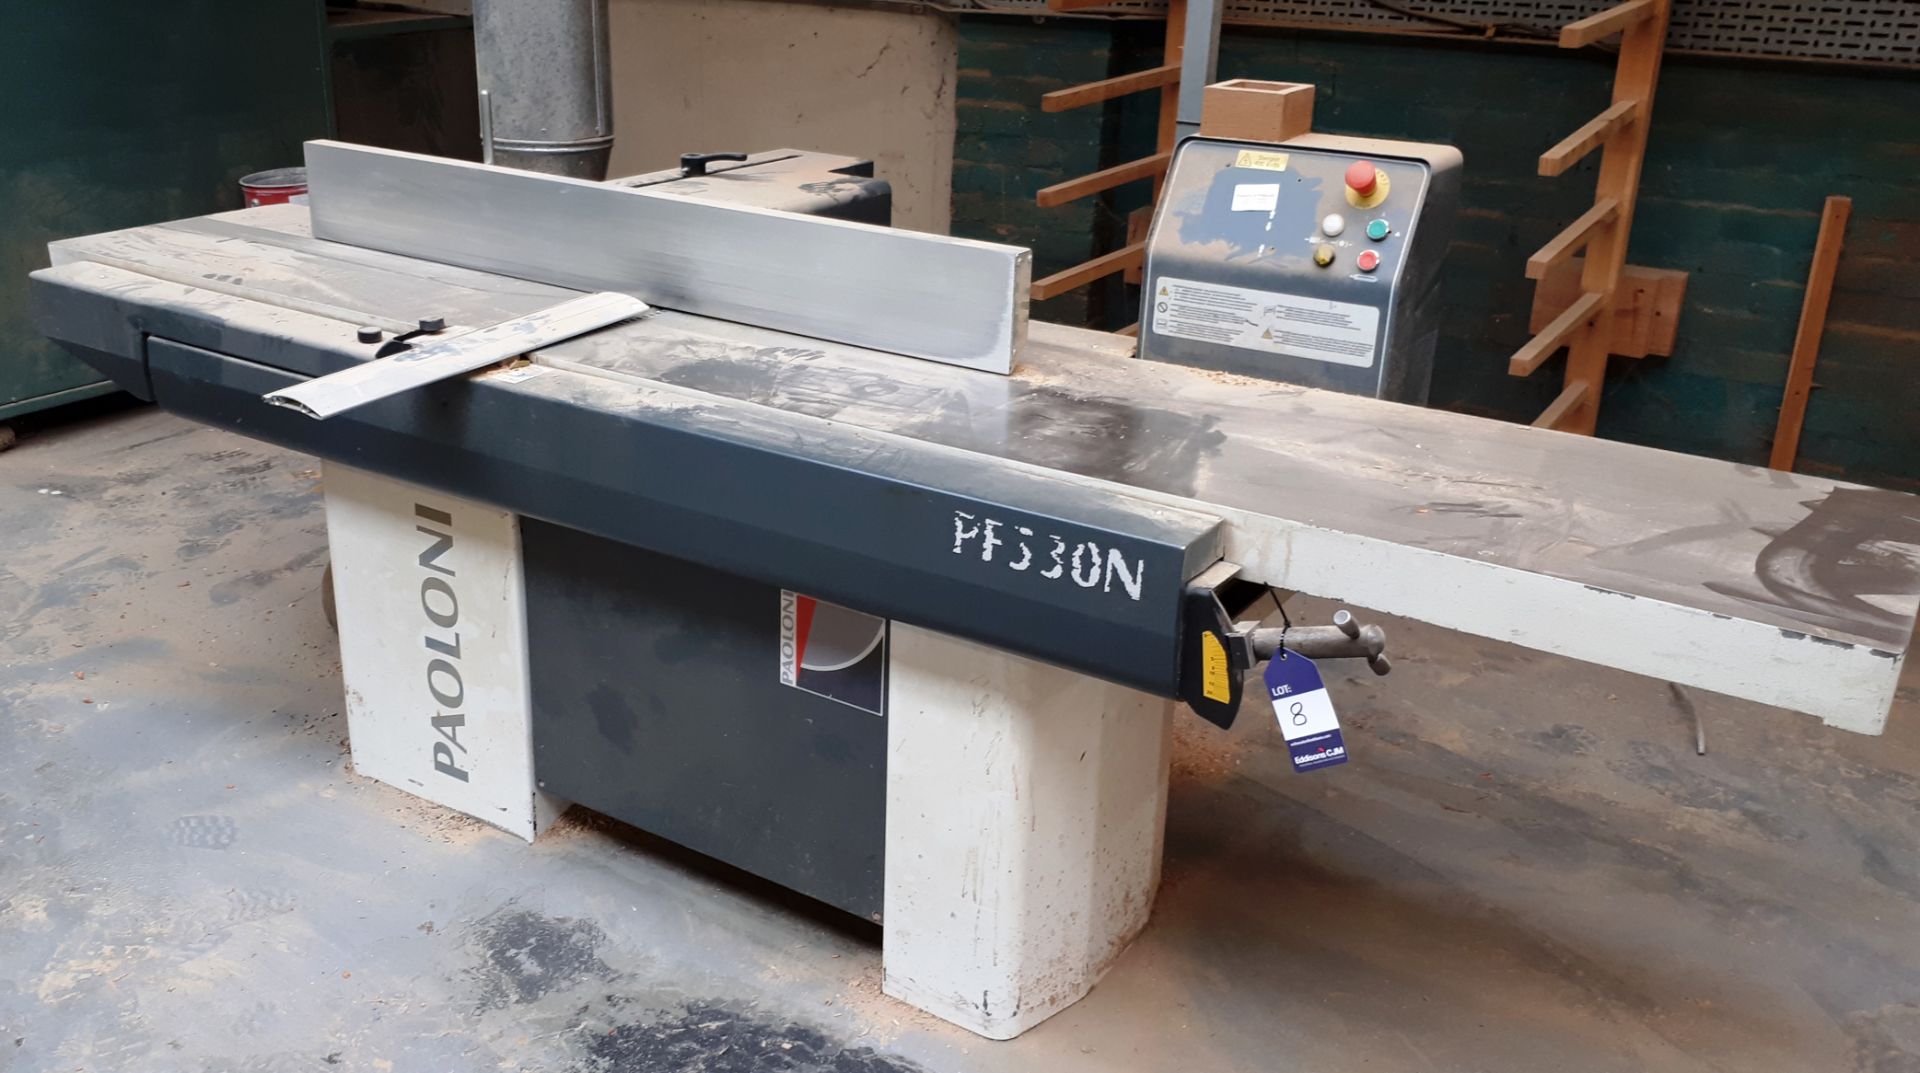 Paoloni PF530N surface planer, serial number 21342 (2008)